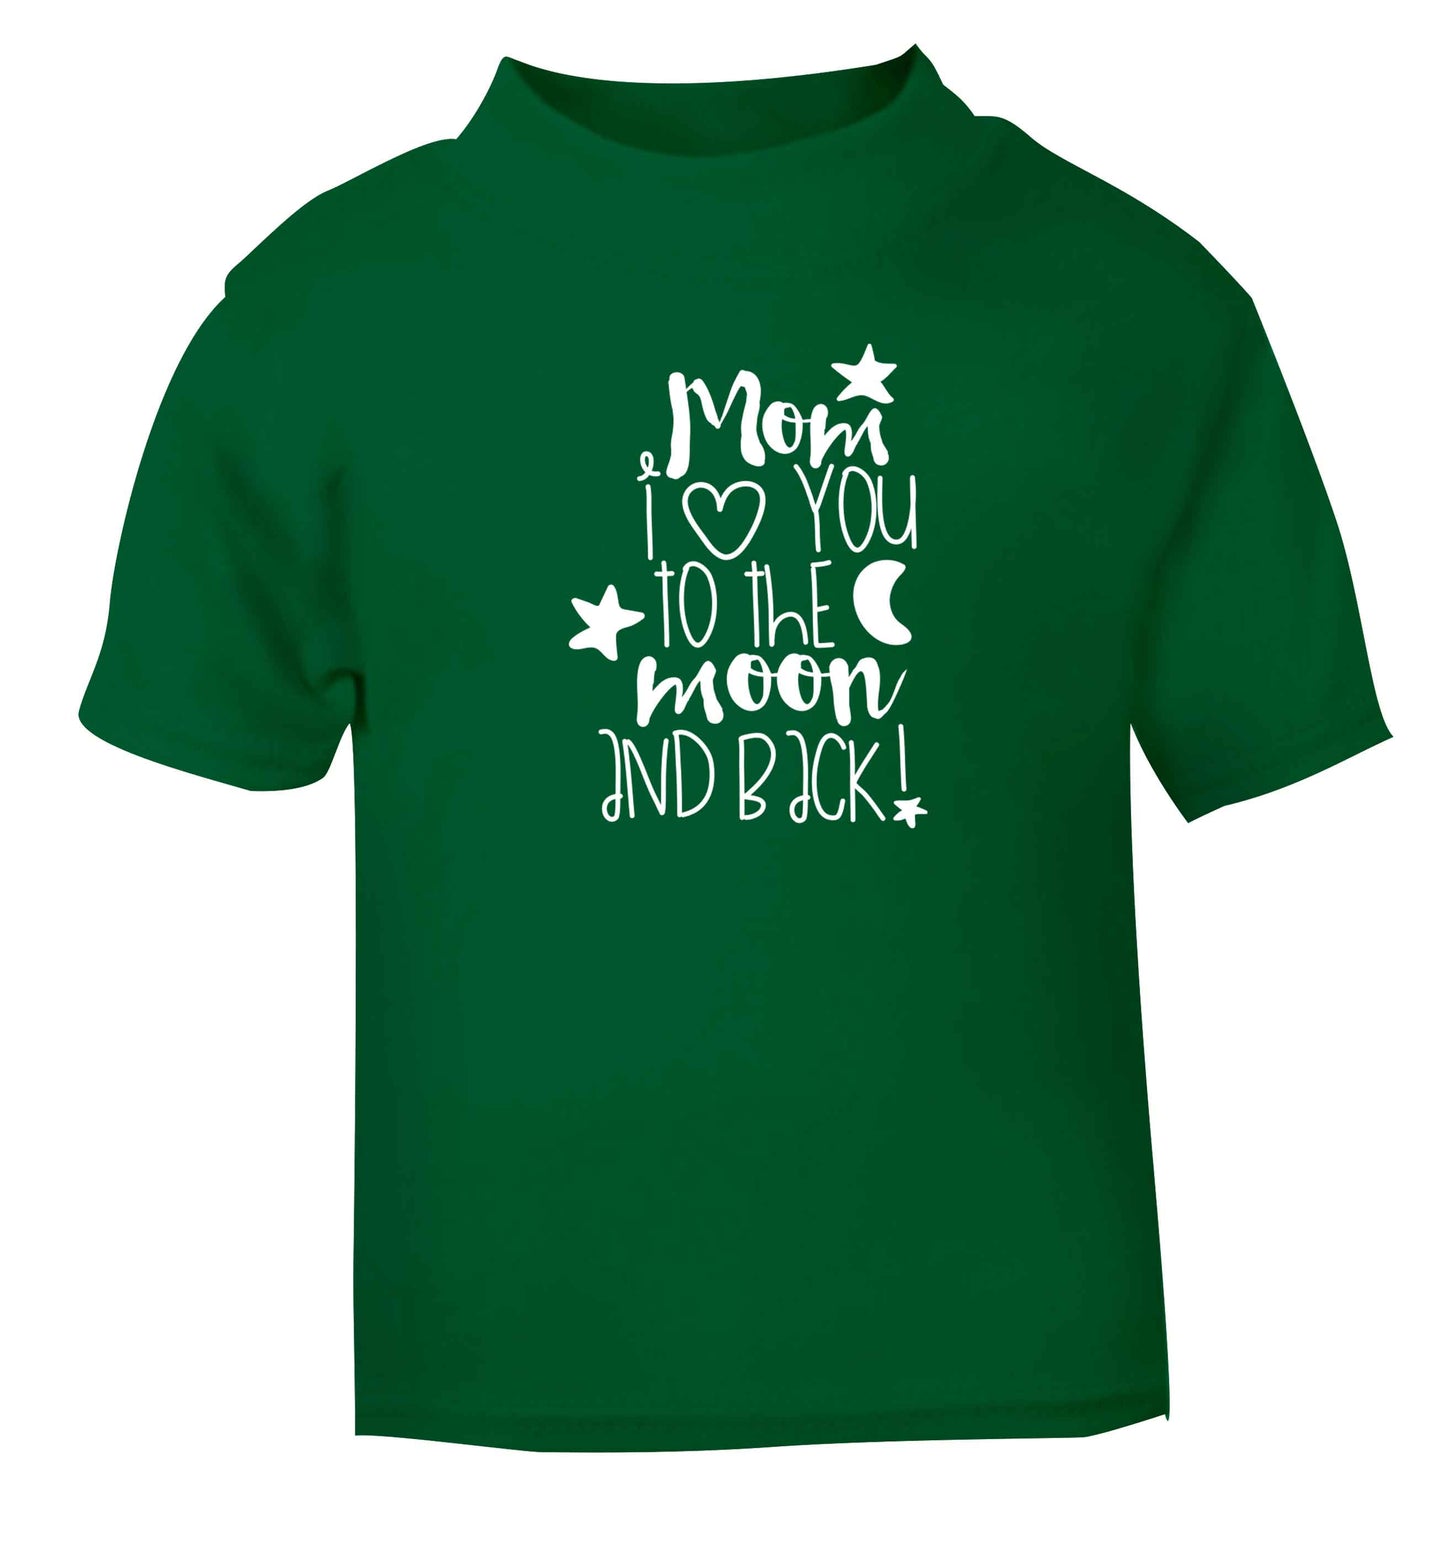 Mom I love you to the moon and back green baby toddler Tshirt 2 Years